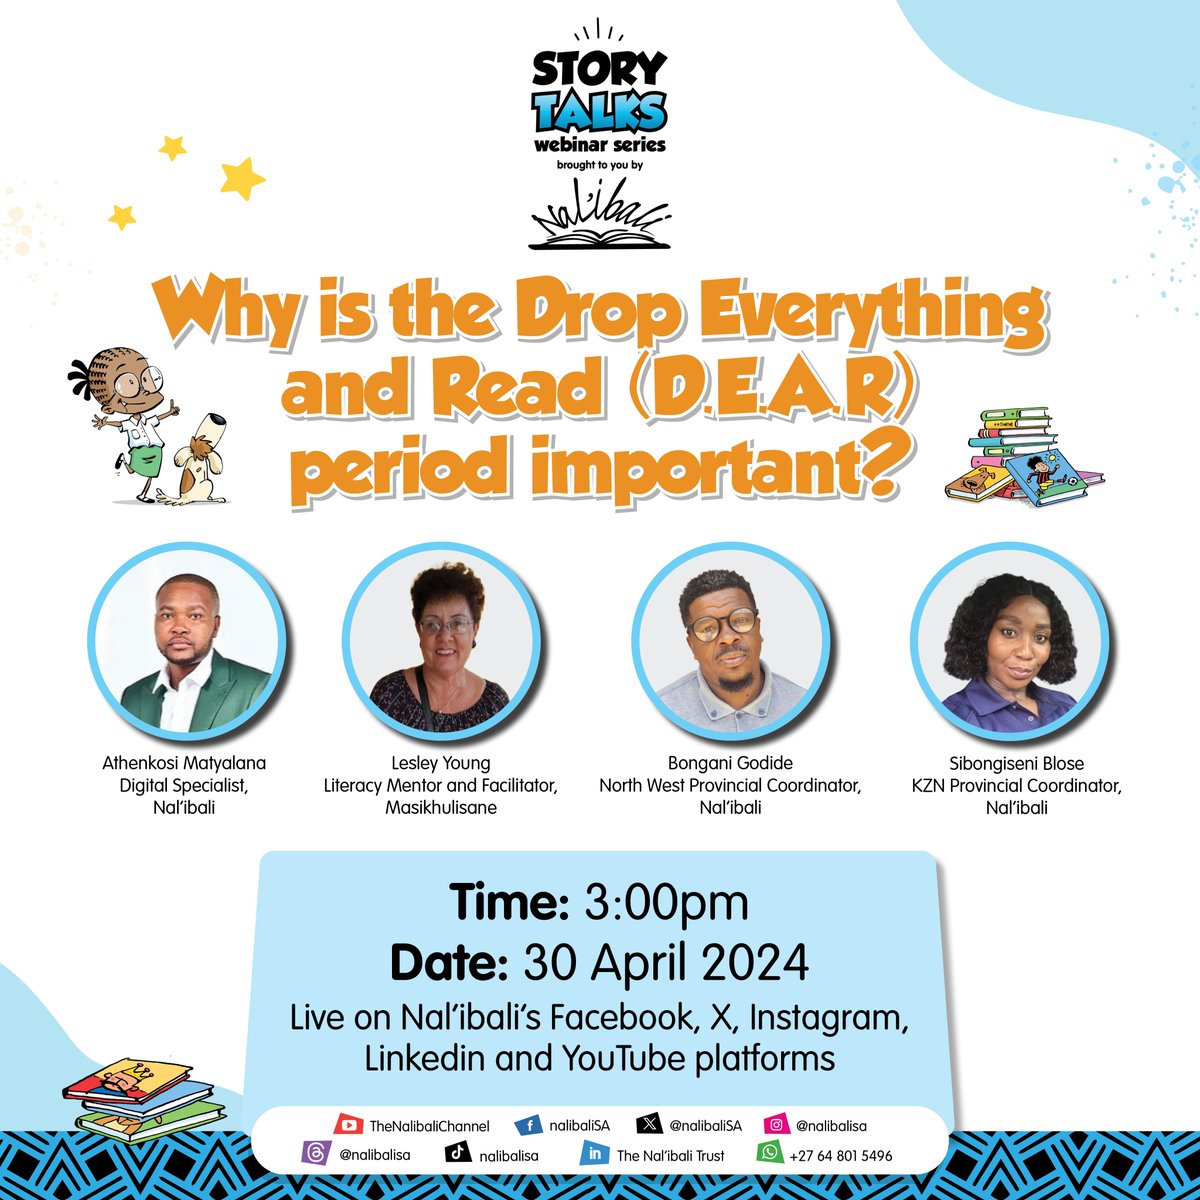 REMINDER: Don't forget to join Nal'ibali's webinar on the importance and benefits of Drop Everything and Read (D.E.A.R) periods LIVE on Nal'ibali's Facebook, X, Instagram, Linkedin, and YouTube platforms at 3:00 pm tomorrow!! #DEAR #Nalibali #Literacy #readingforenjoyment…